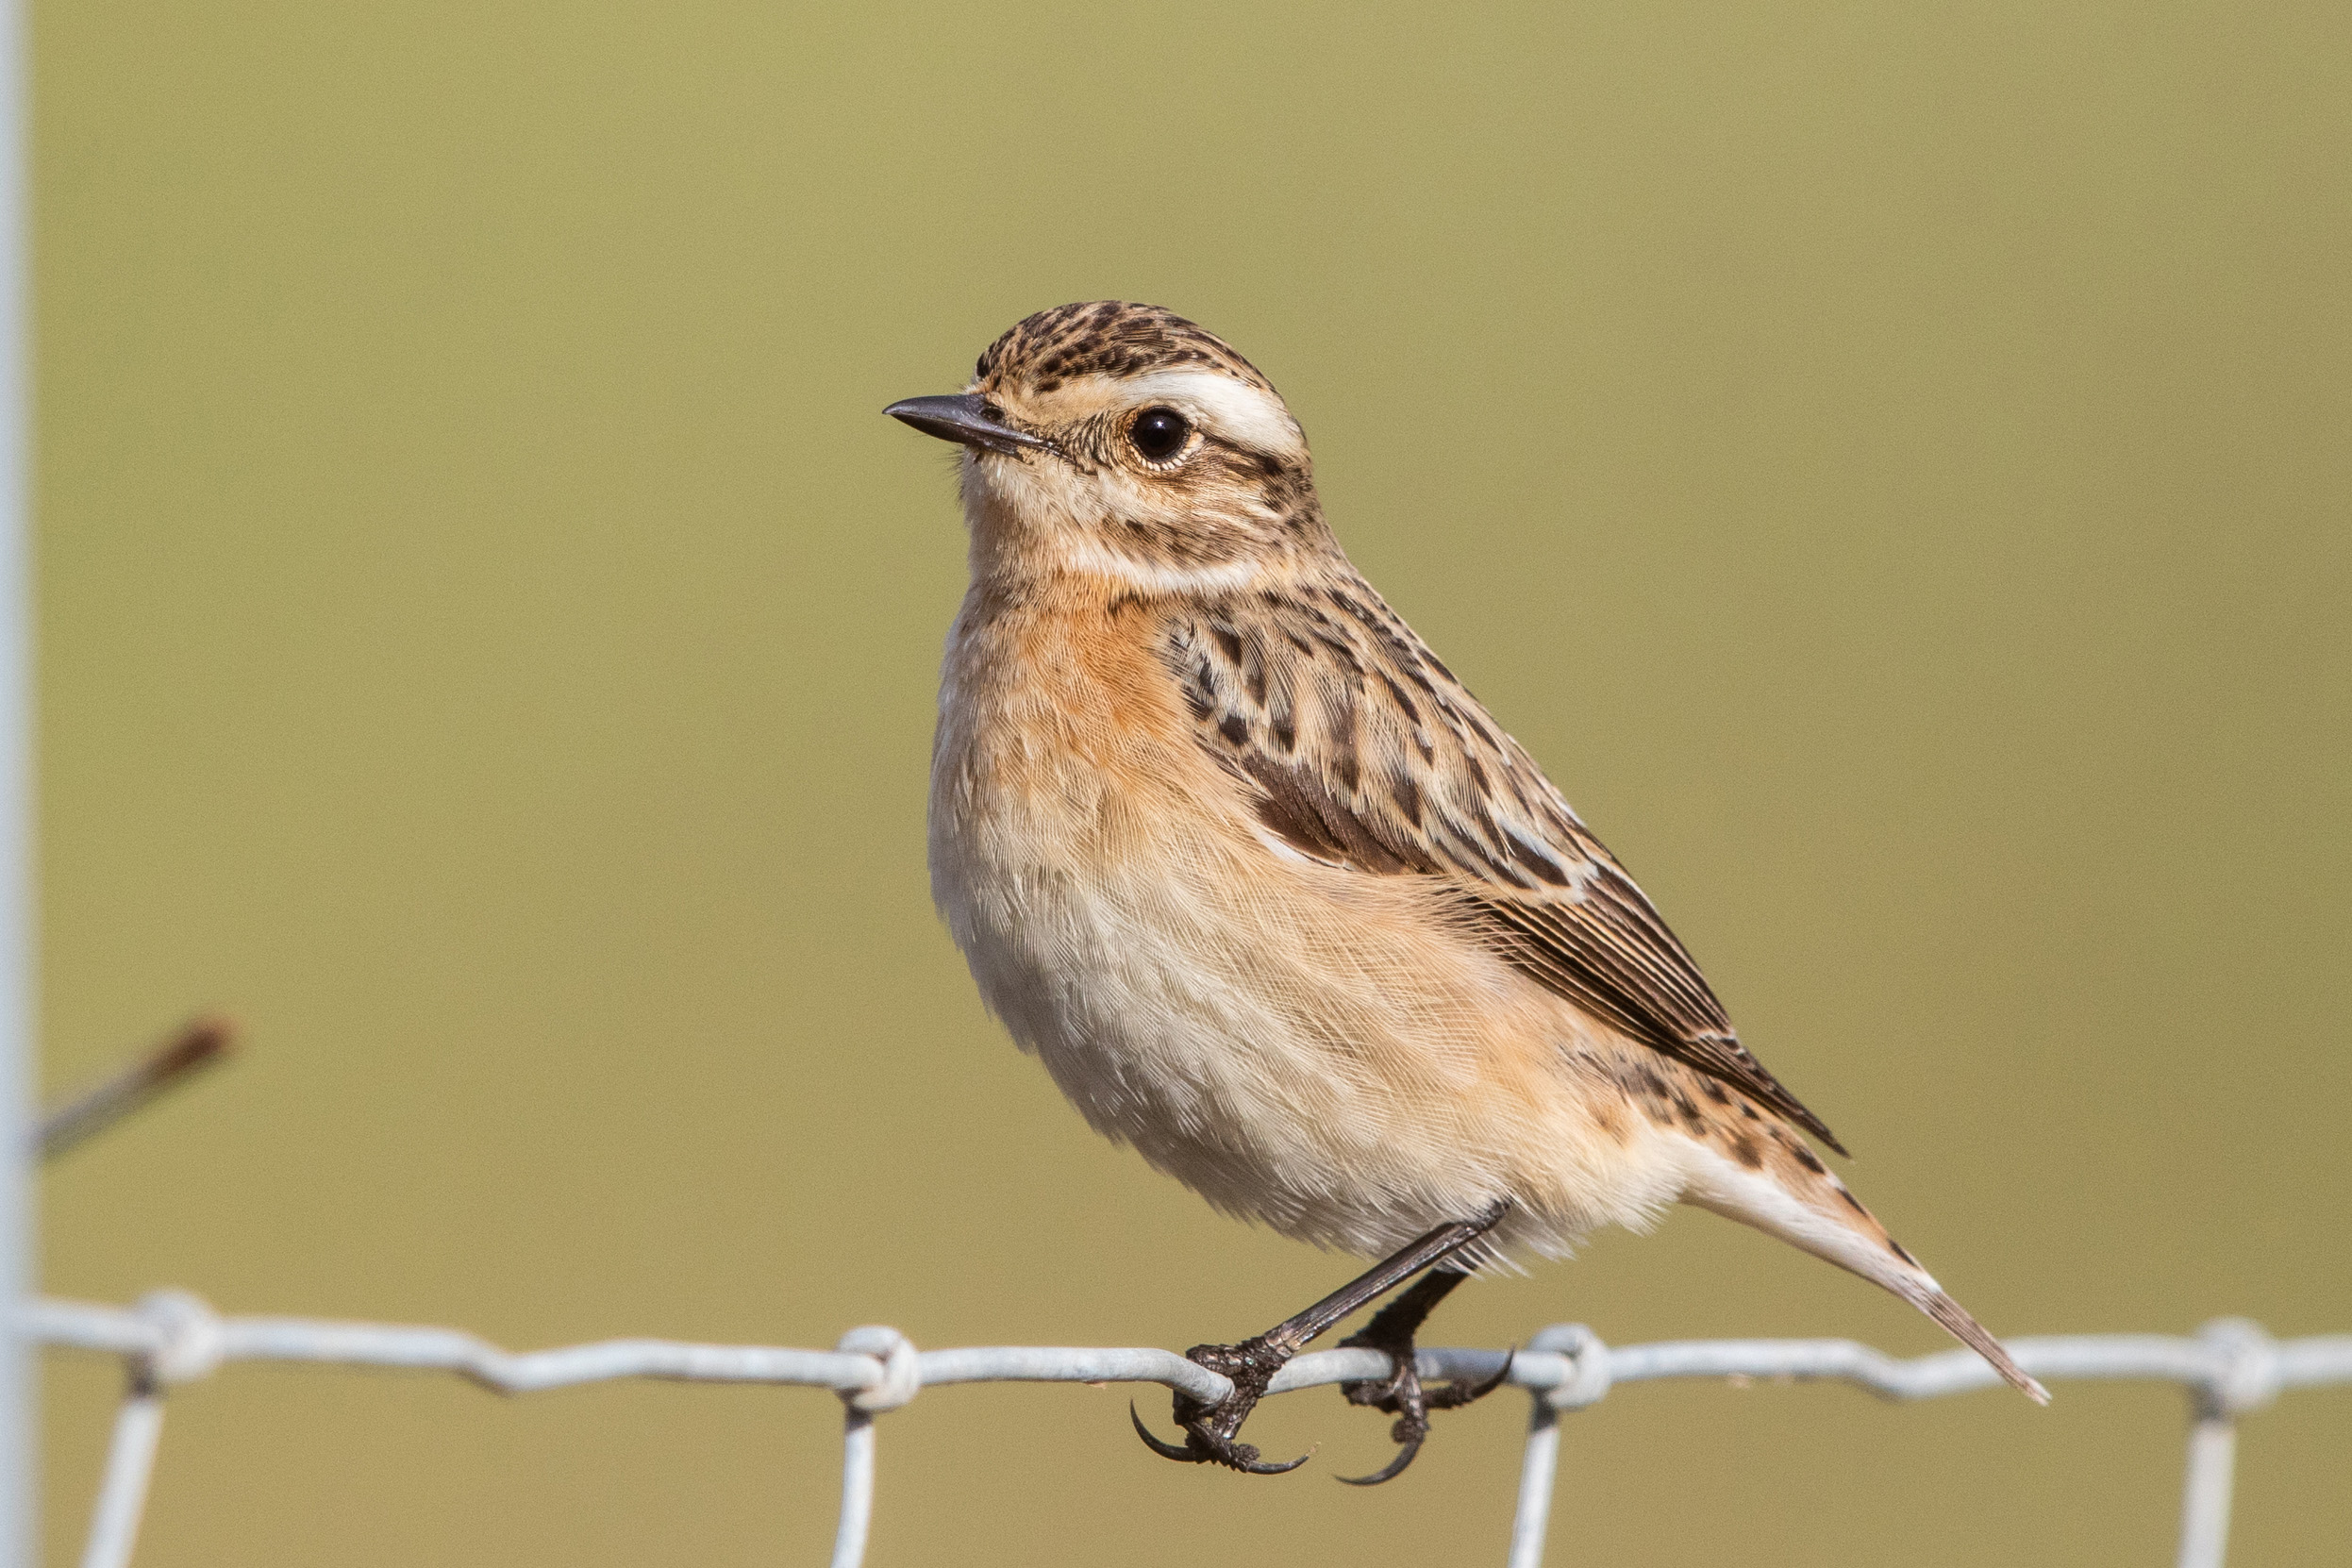 A lone female Whinchat perched on a metal fence.